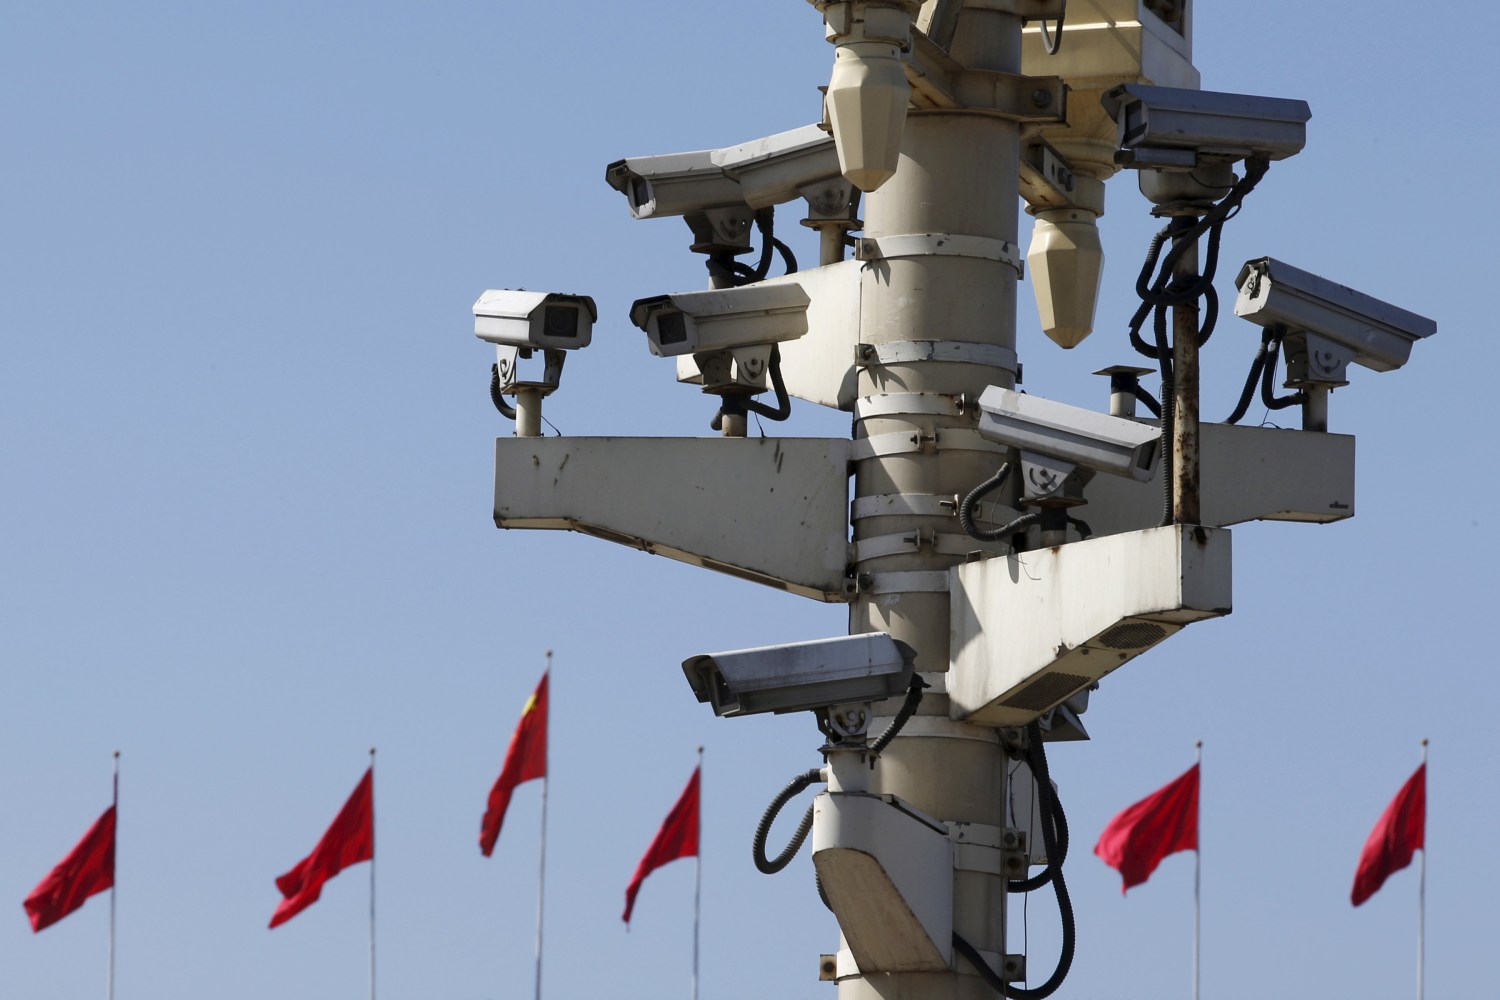 Security cameras in Tiananmen square are seen in front of flags on the Great Hall of the People where the National People's Congress (NPC) is being held, in Beijing, China, March 11, 2016. REUTERS/Kim Kyung-Hoon - GF10000341408